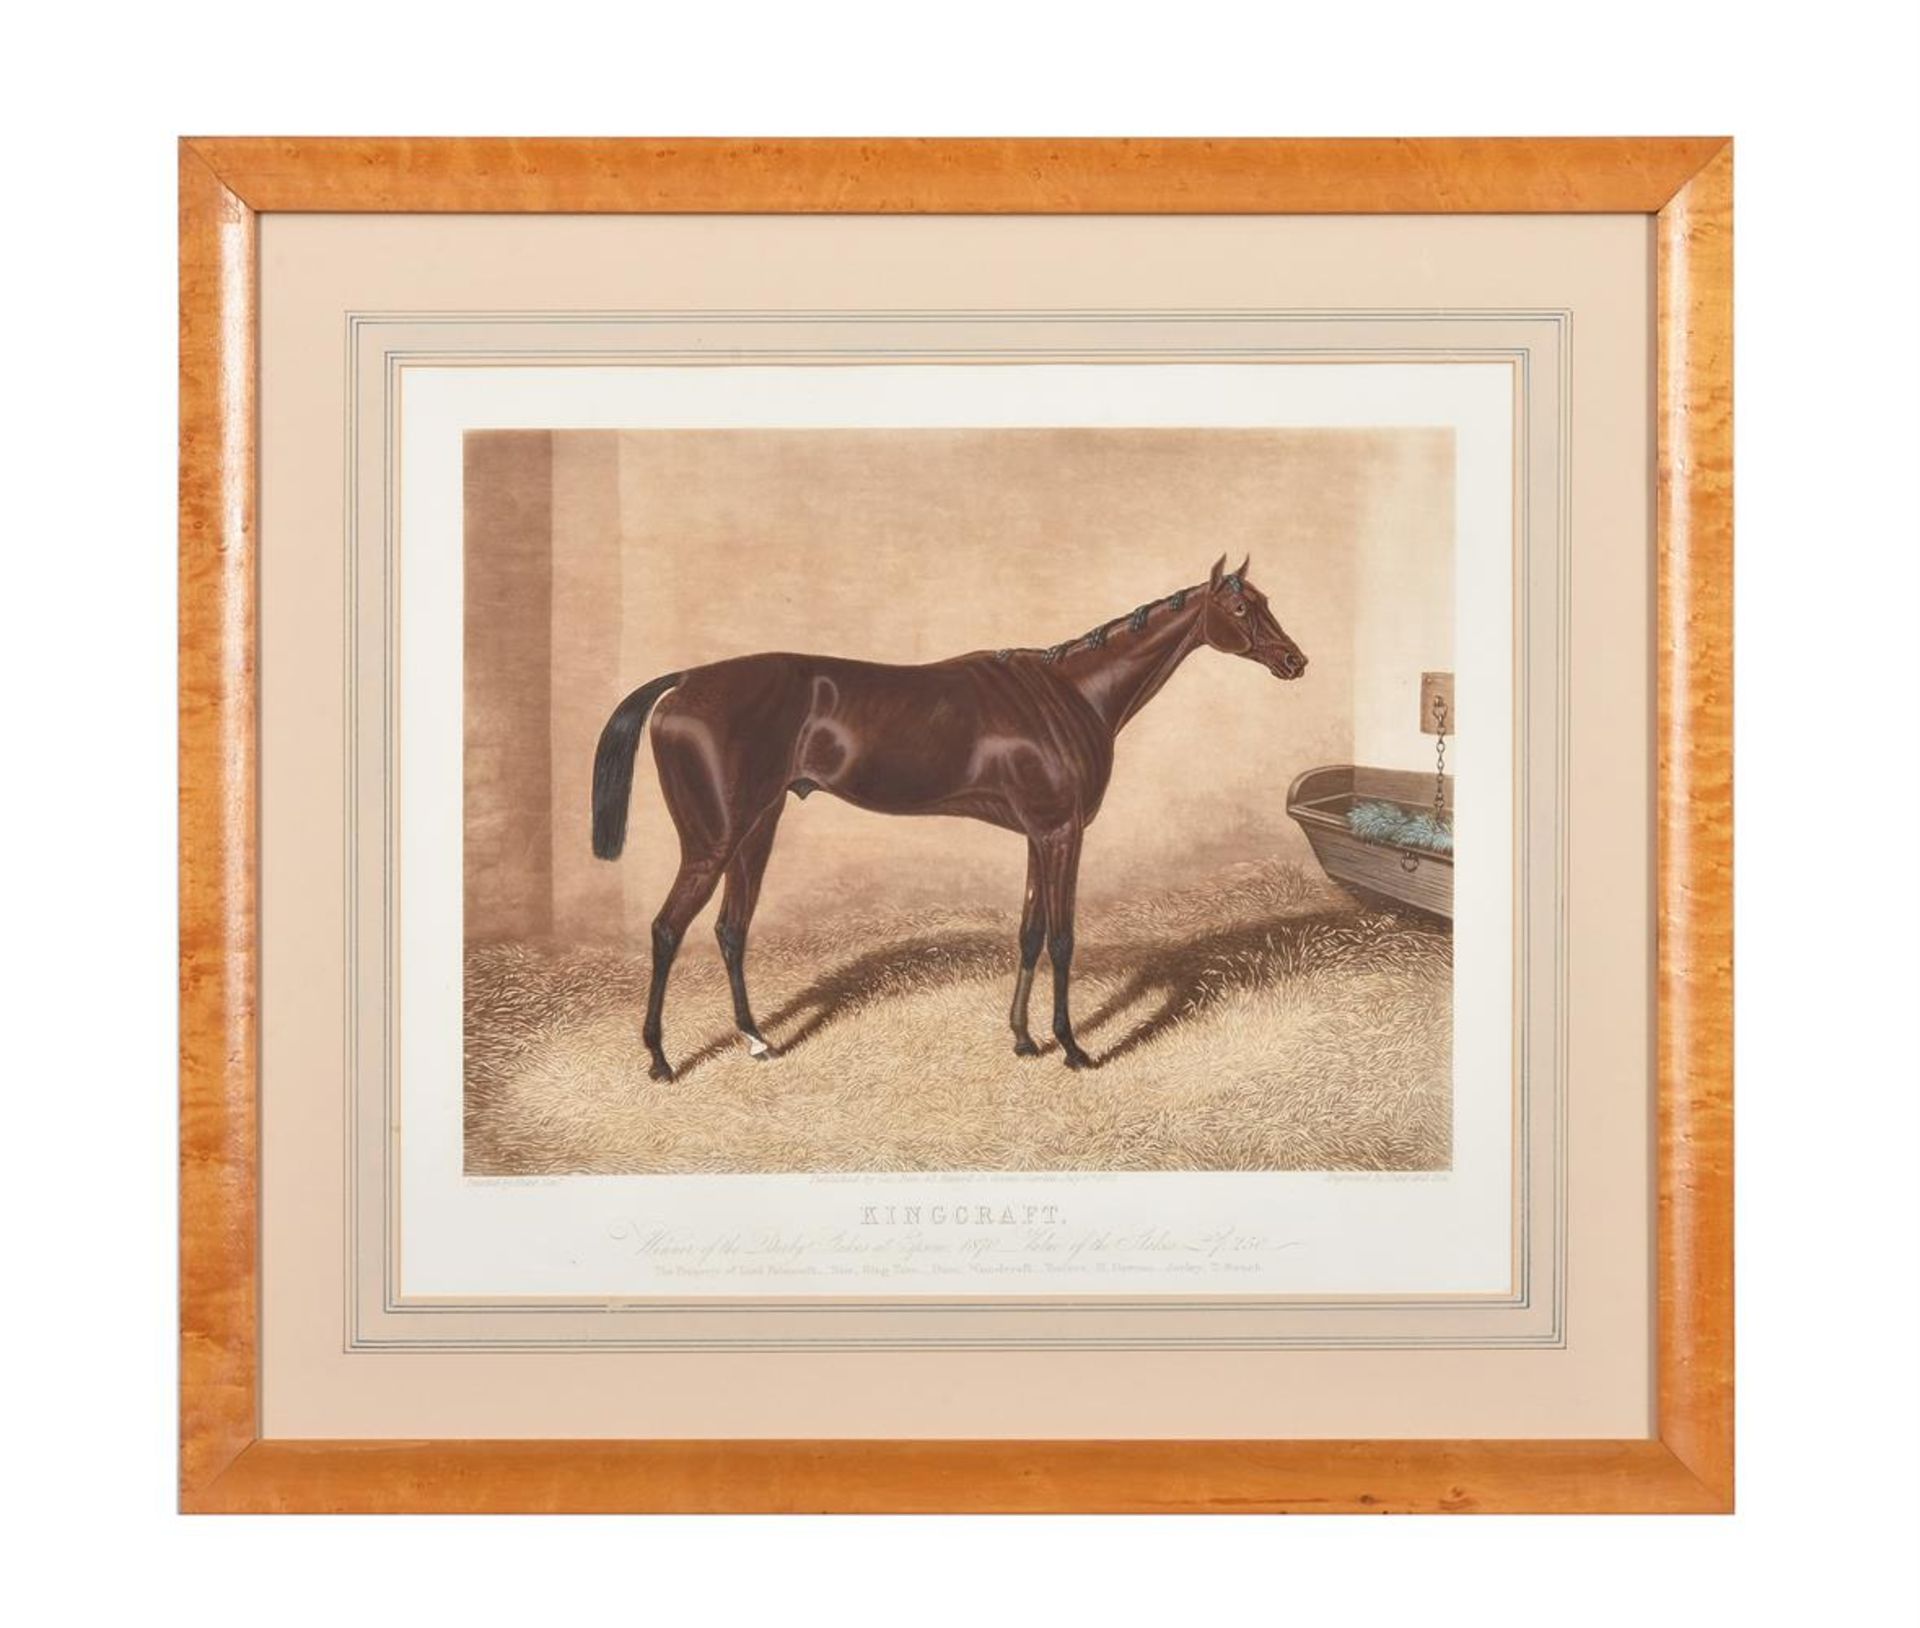 After Hunt Snr., after the engraving by Hunt & Son, Two decorative racehorse prints - Image 2 of 6